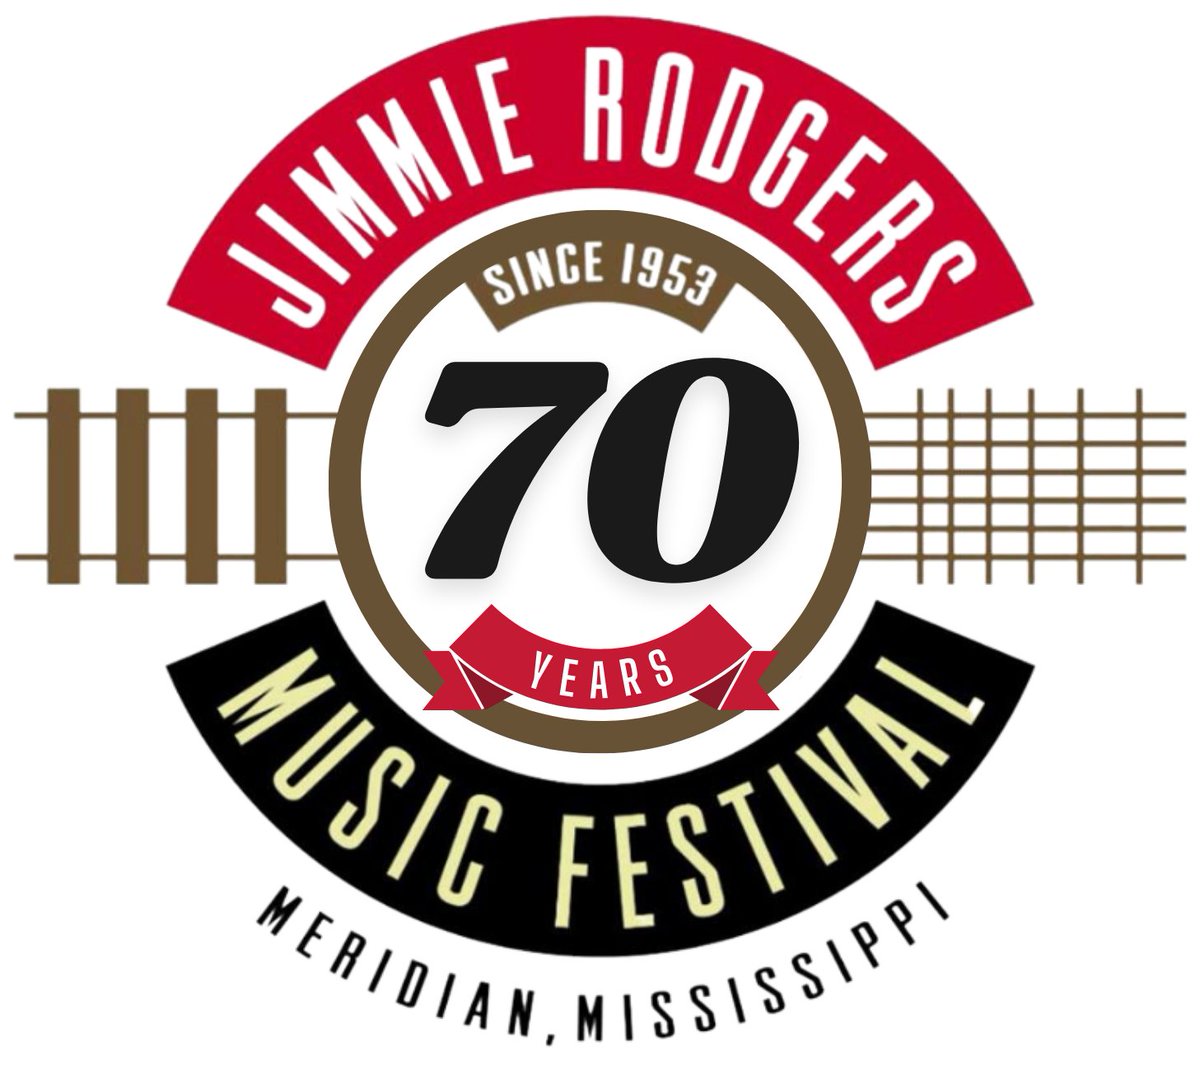 Tune in to America’s longest-running music festival, starting May 7th. This eight-day event celebrates the legacy of Mississippi musician Jimmie Rogers with a diverse lineup of artists. For more information: bit.ly/42triTf #VisitMS #WanderMS #VisitMeridian